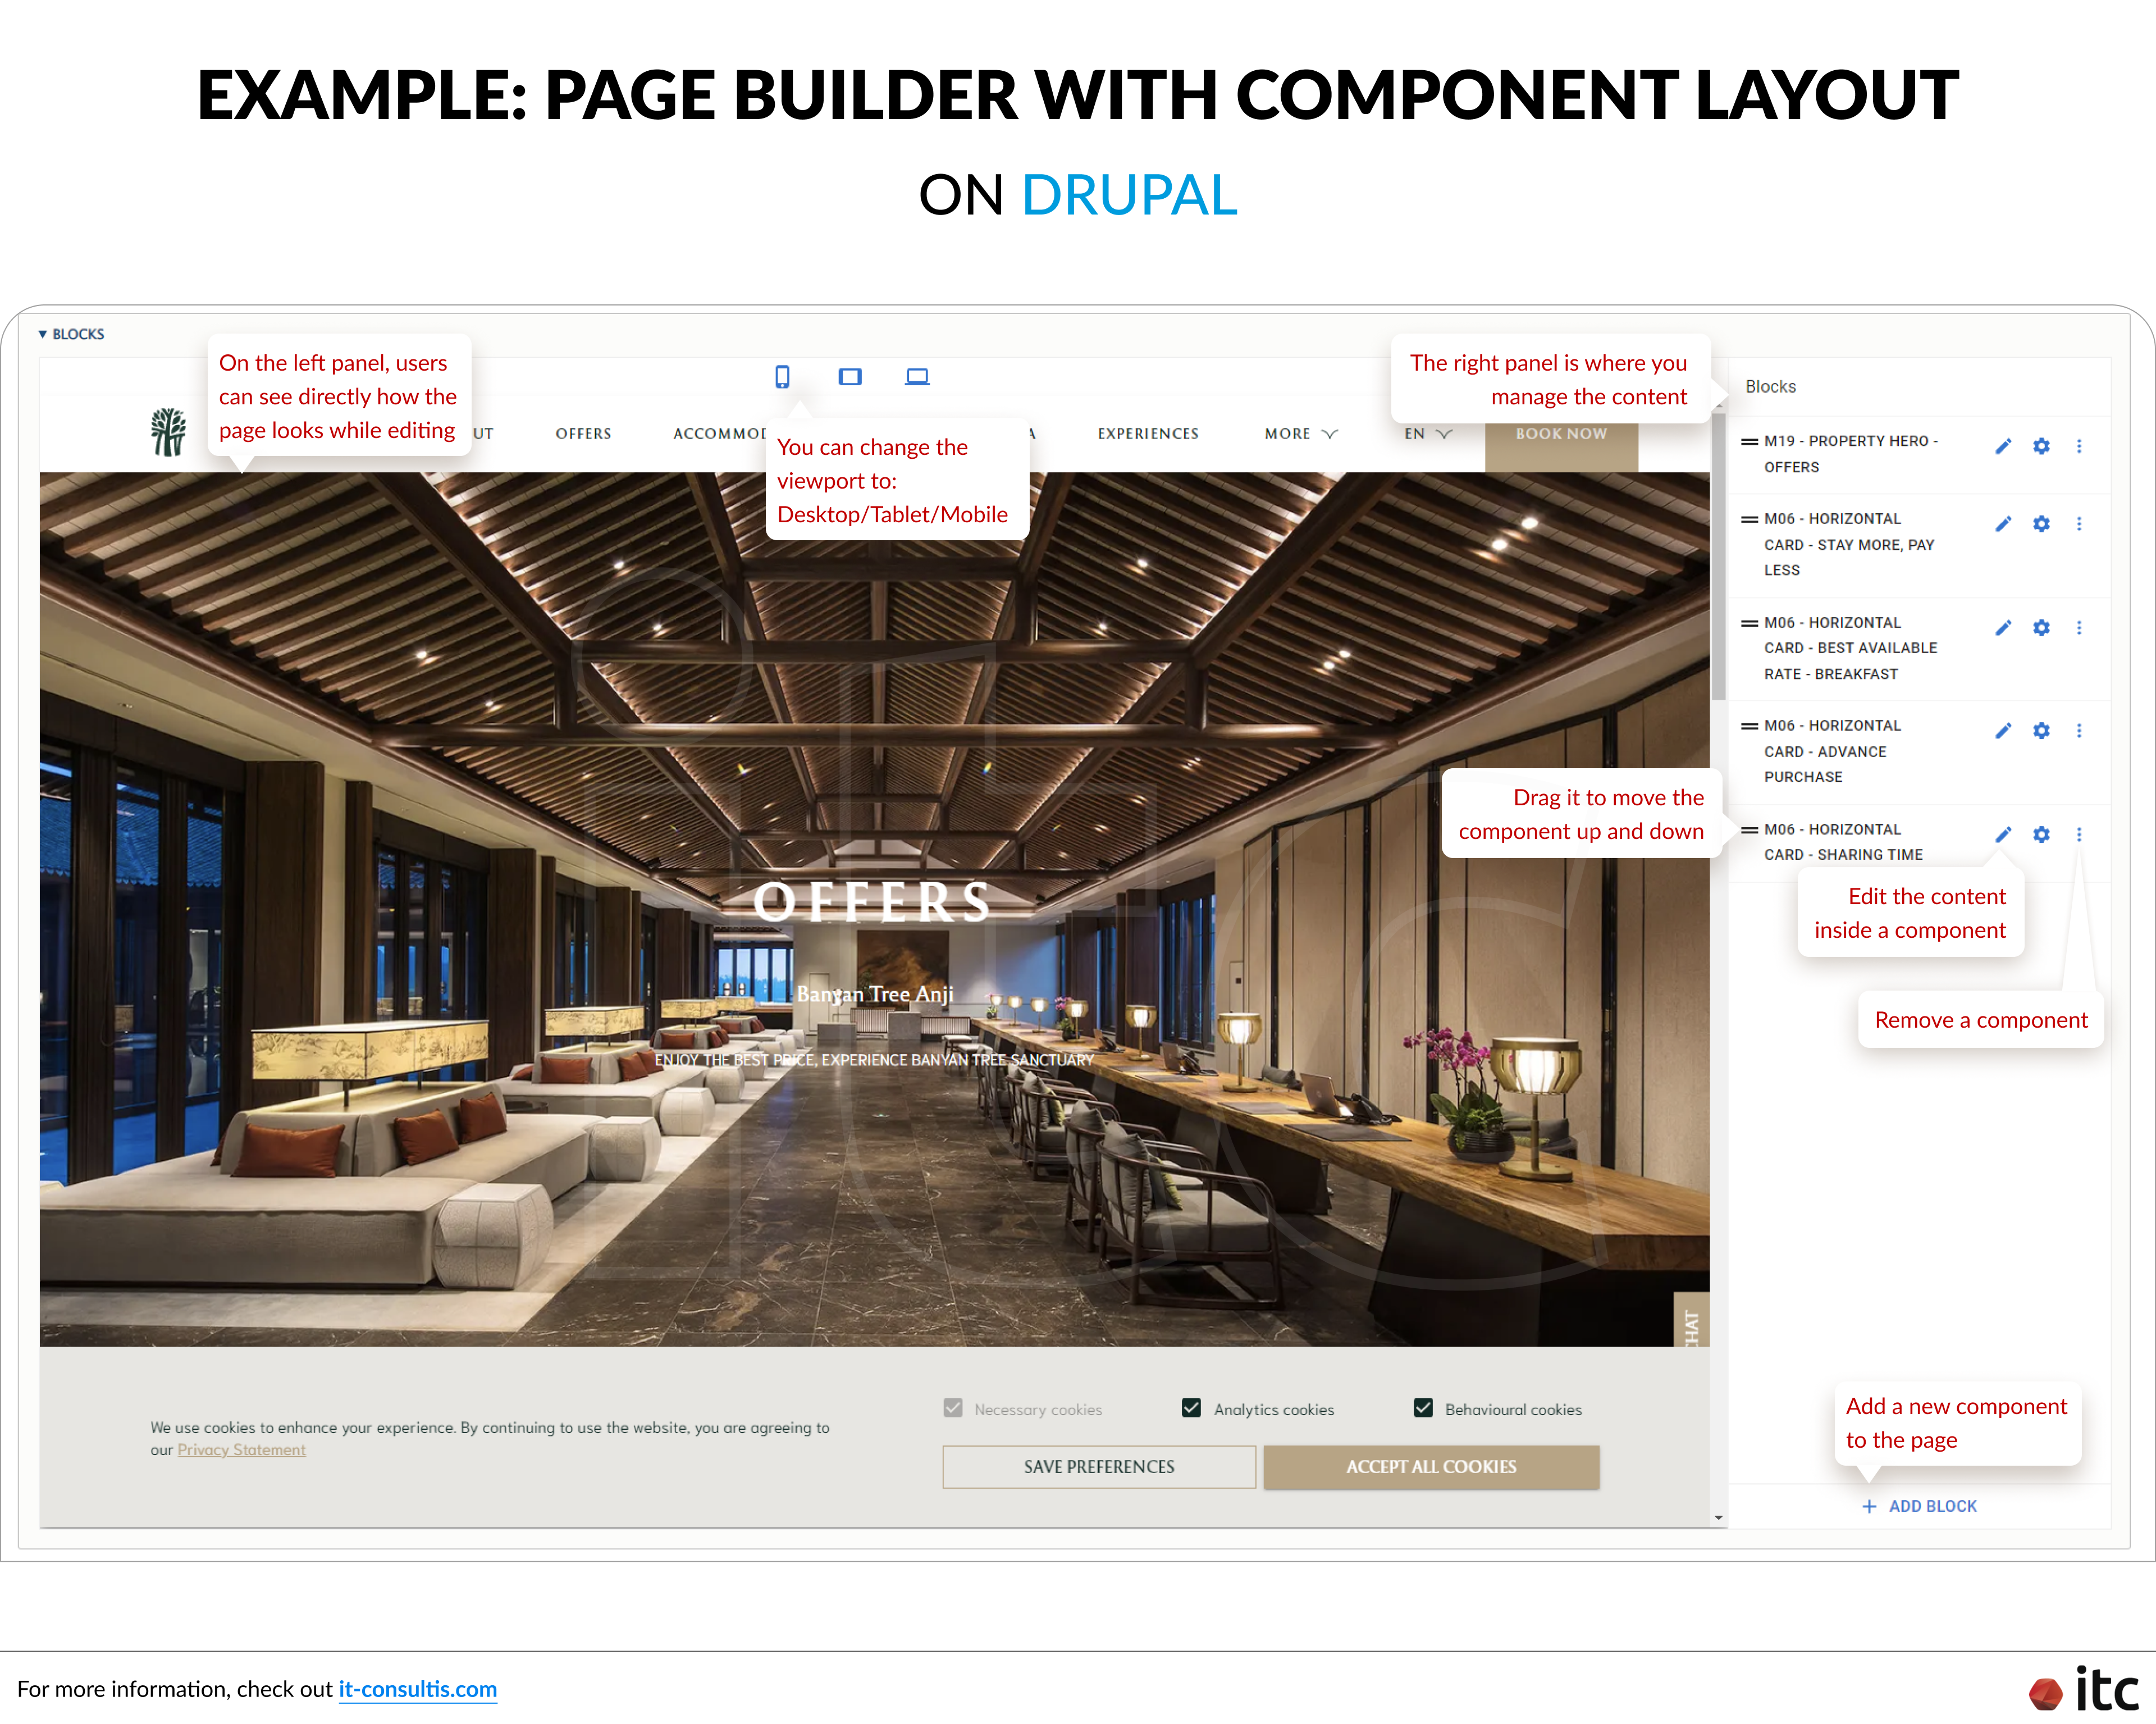 Example of Drupal page builder with component-based web framework